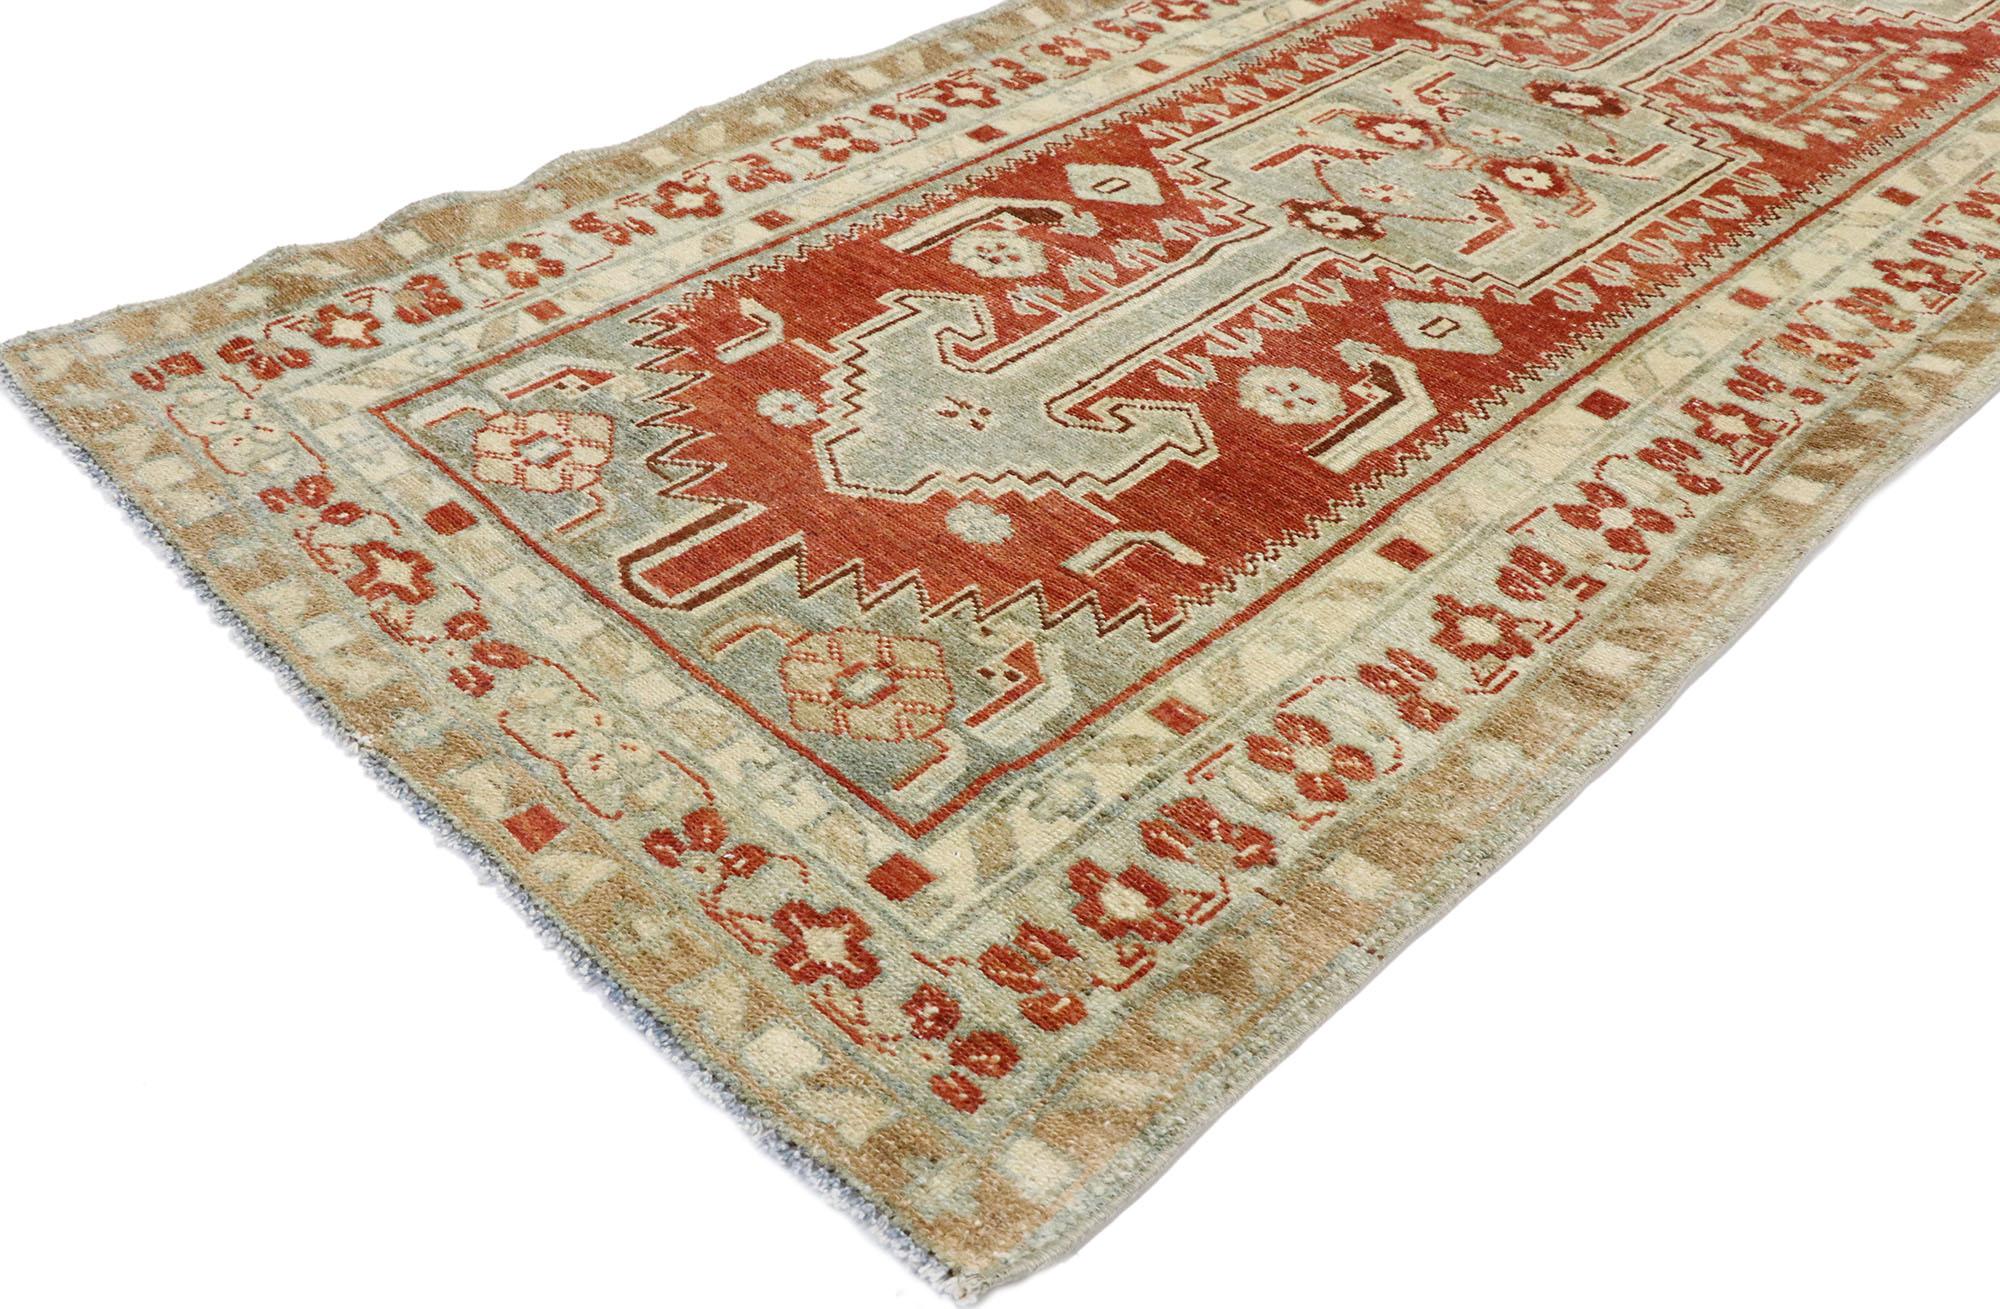 53476 Vintage Persian Malayer runner with Modern Rustic Artisan Tribal style. Embodying tribal style and understated elegance with rustic sensibility, this hand knotted wool vintage Persian Malayer runner is a captivating vision of woven beauty. The